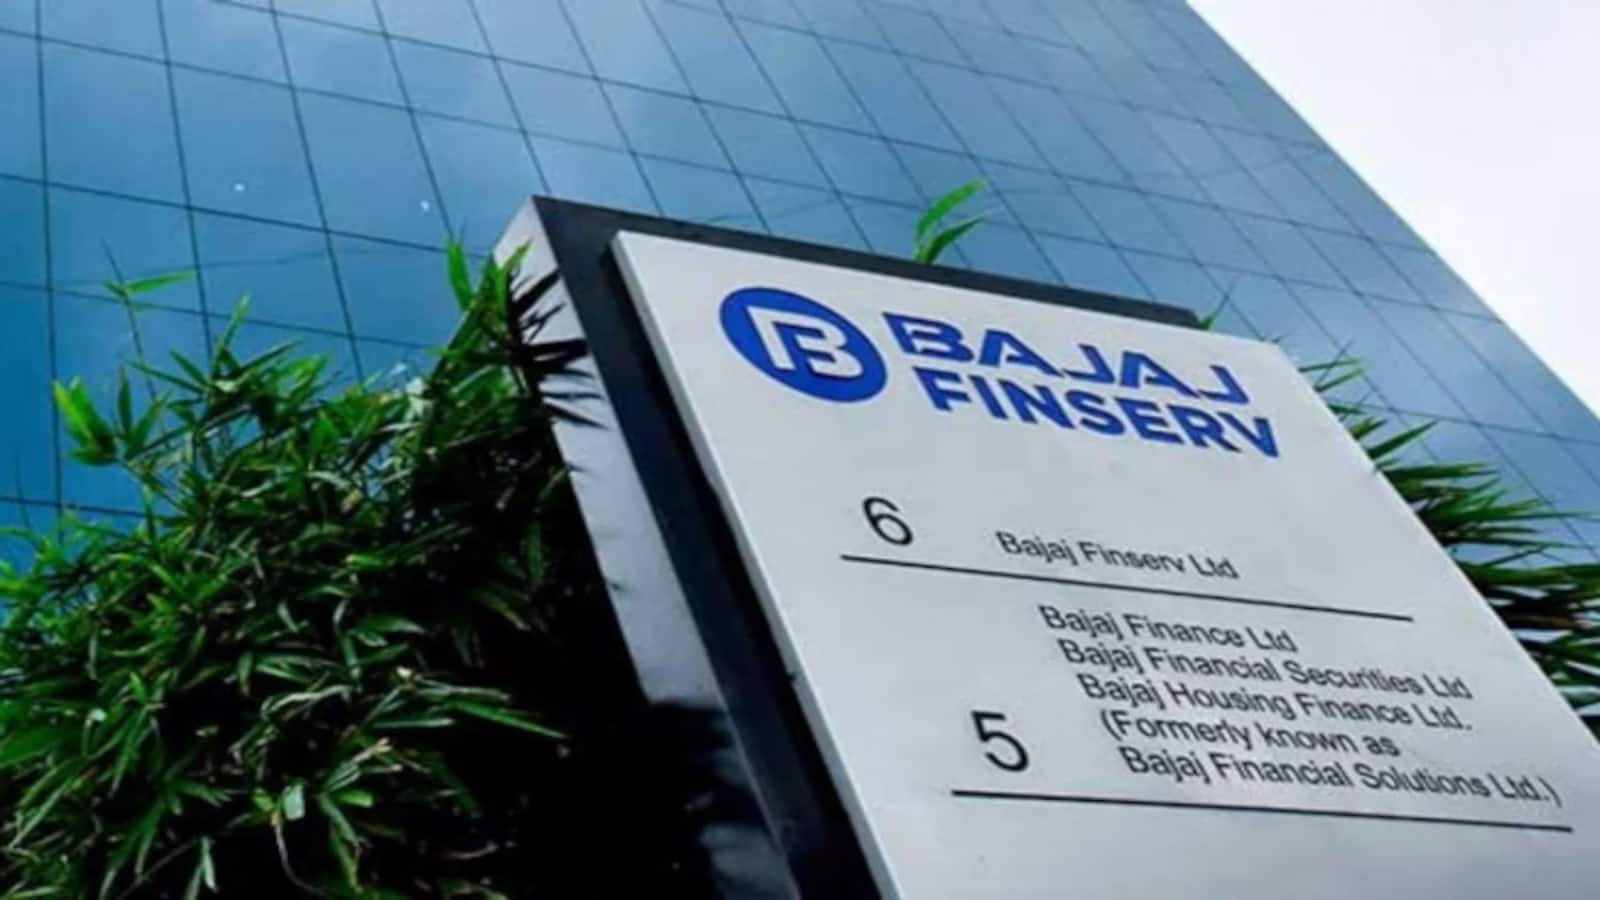 Bajaj Finserv: Subsidiary Bajaj Allianz General Insurance Company announced the gross direct premium underwritten for August at Rs 1,677.87 crore, and the premium in the current financial year up to August at Rs 9,228.81 crore. Subsidiary Bajaj Allianz Life Insurance Company's total premium for August stood at Rs 926.41 crore and premium in the current financial year (FY24) up to August at Rs 3,828.06 crore.